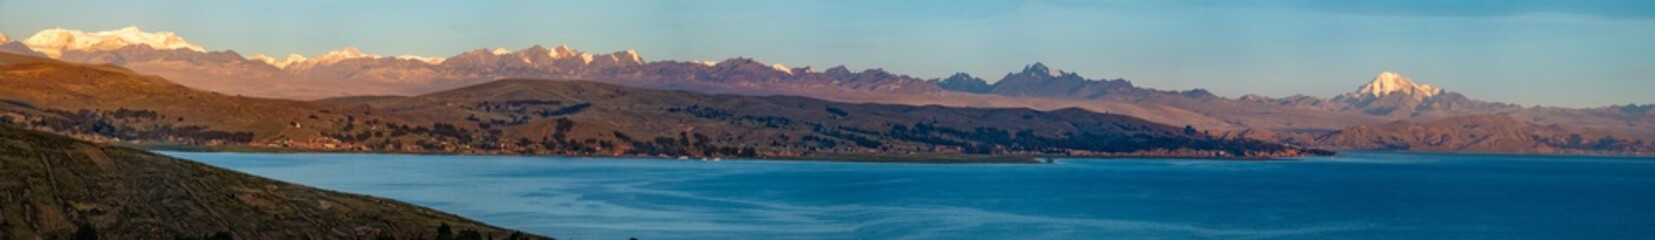 Panoramic view of the Cordillera Real mountains from the shores of the Titicaca Lake, Bolivia. The...